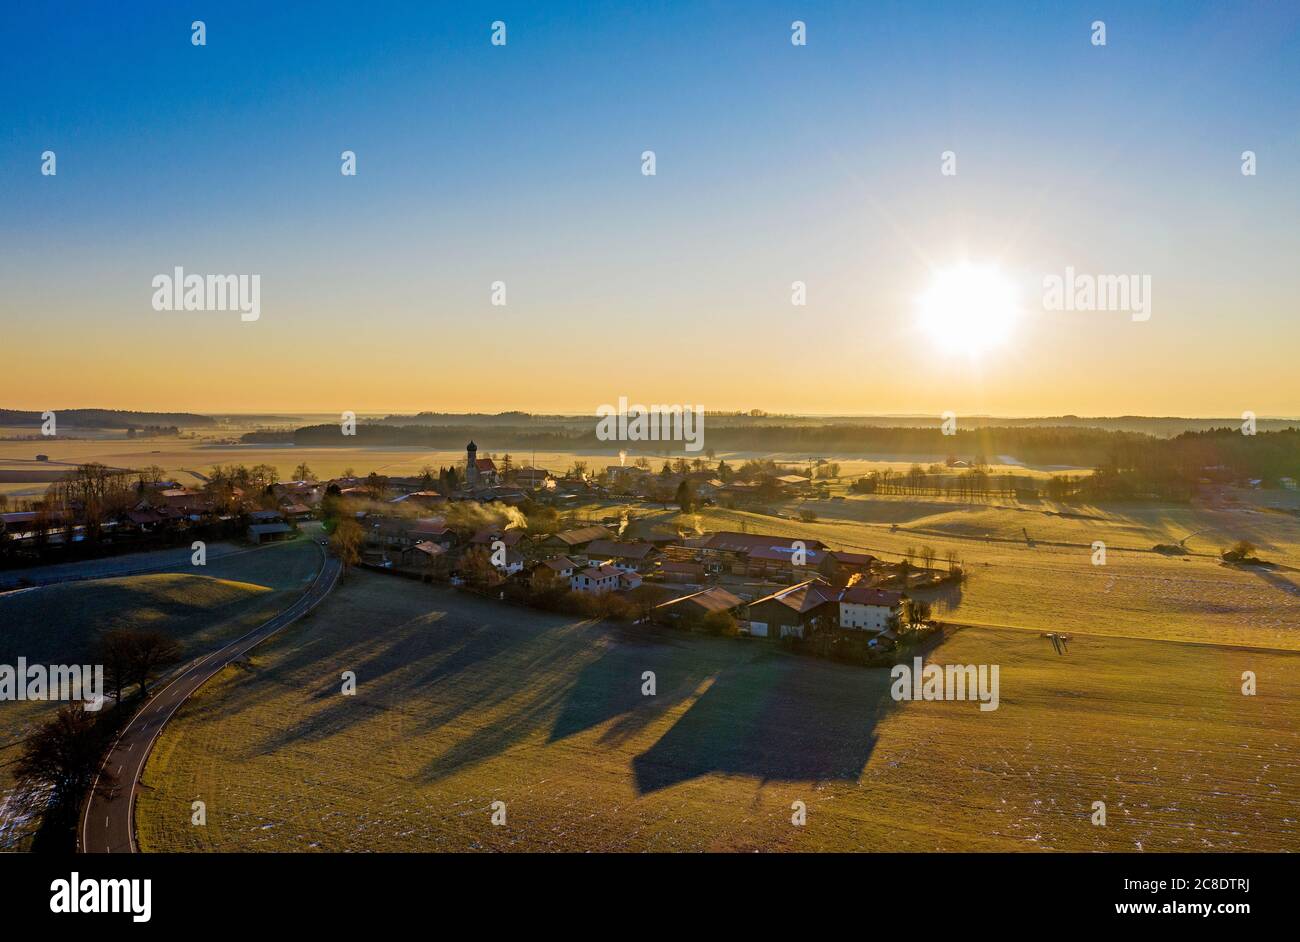 Germany, Bavaria, Dietramszell, Drone view of countryside village at sunrise Stock Photo